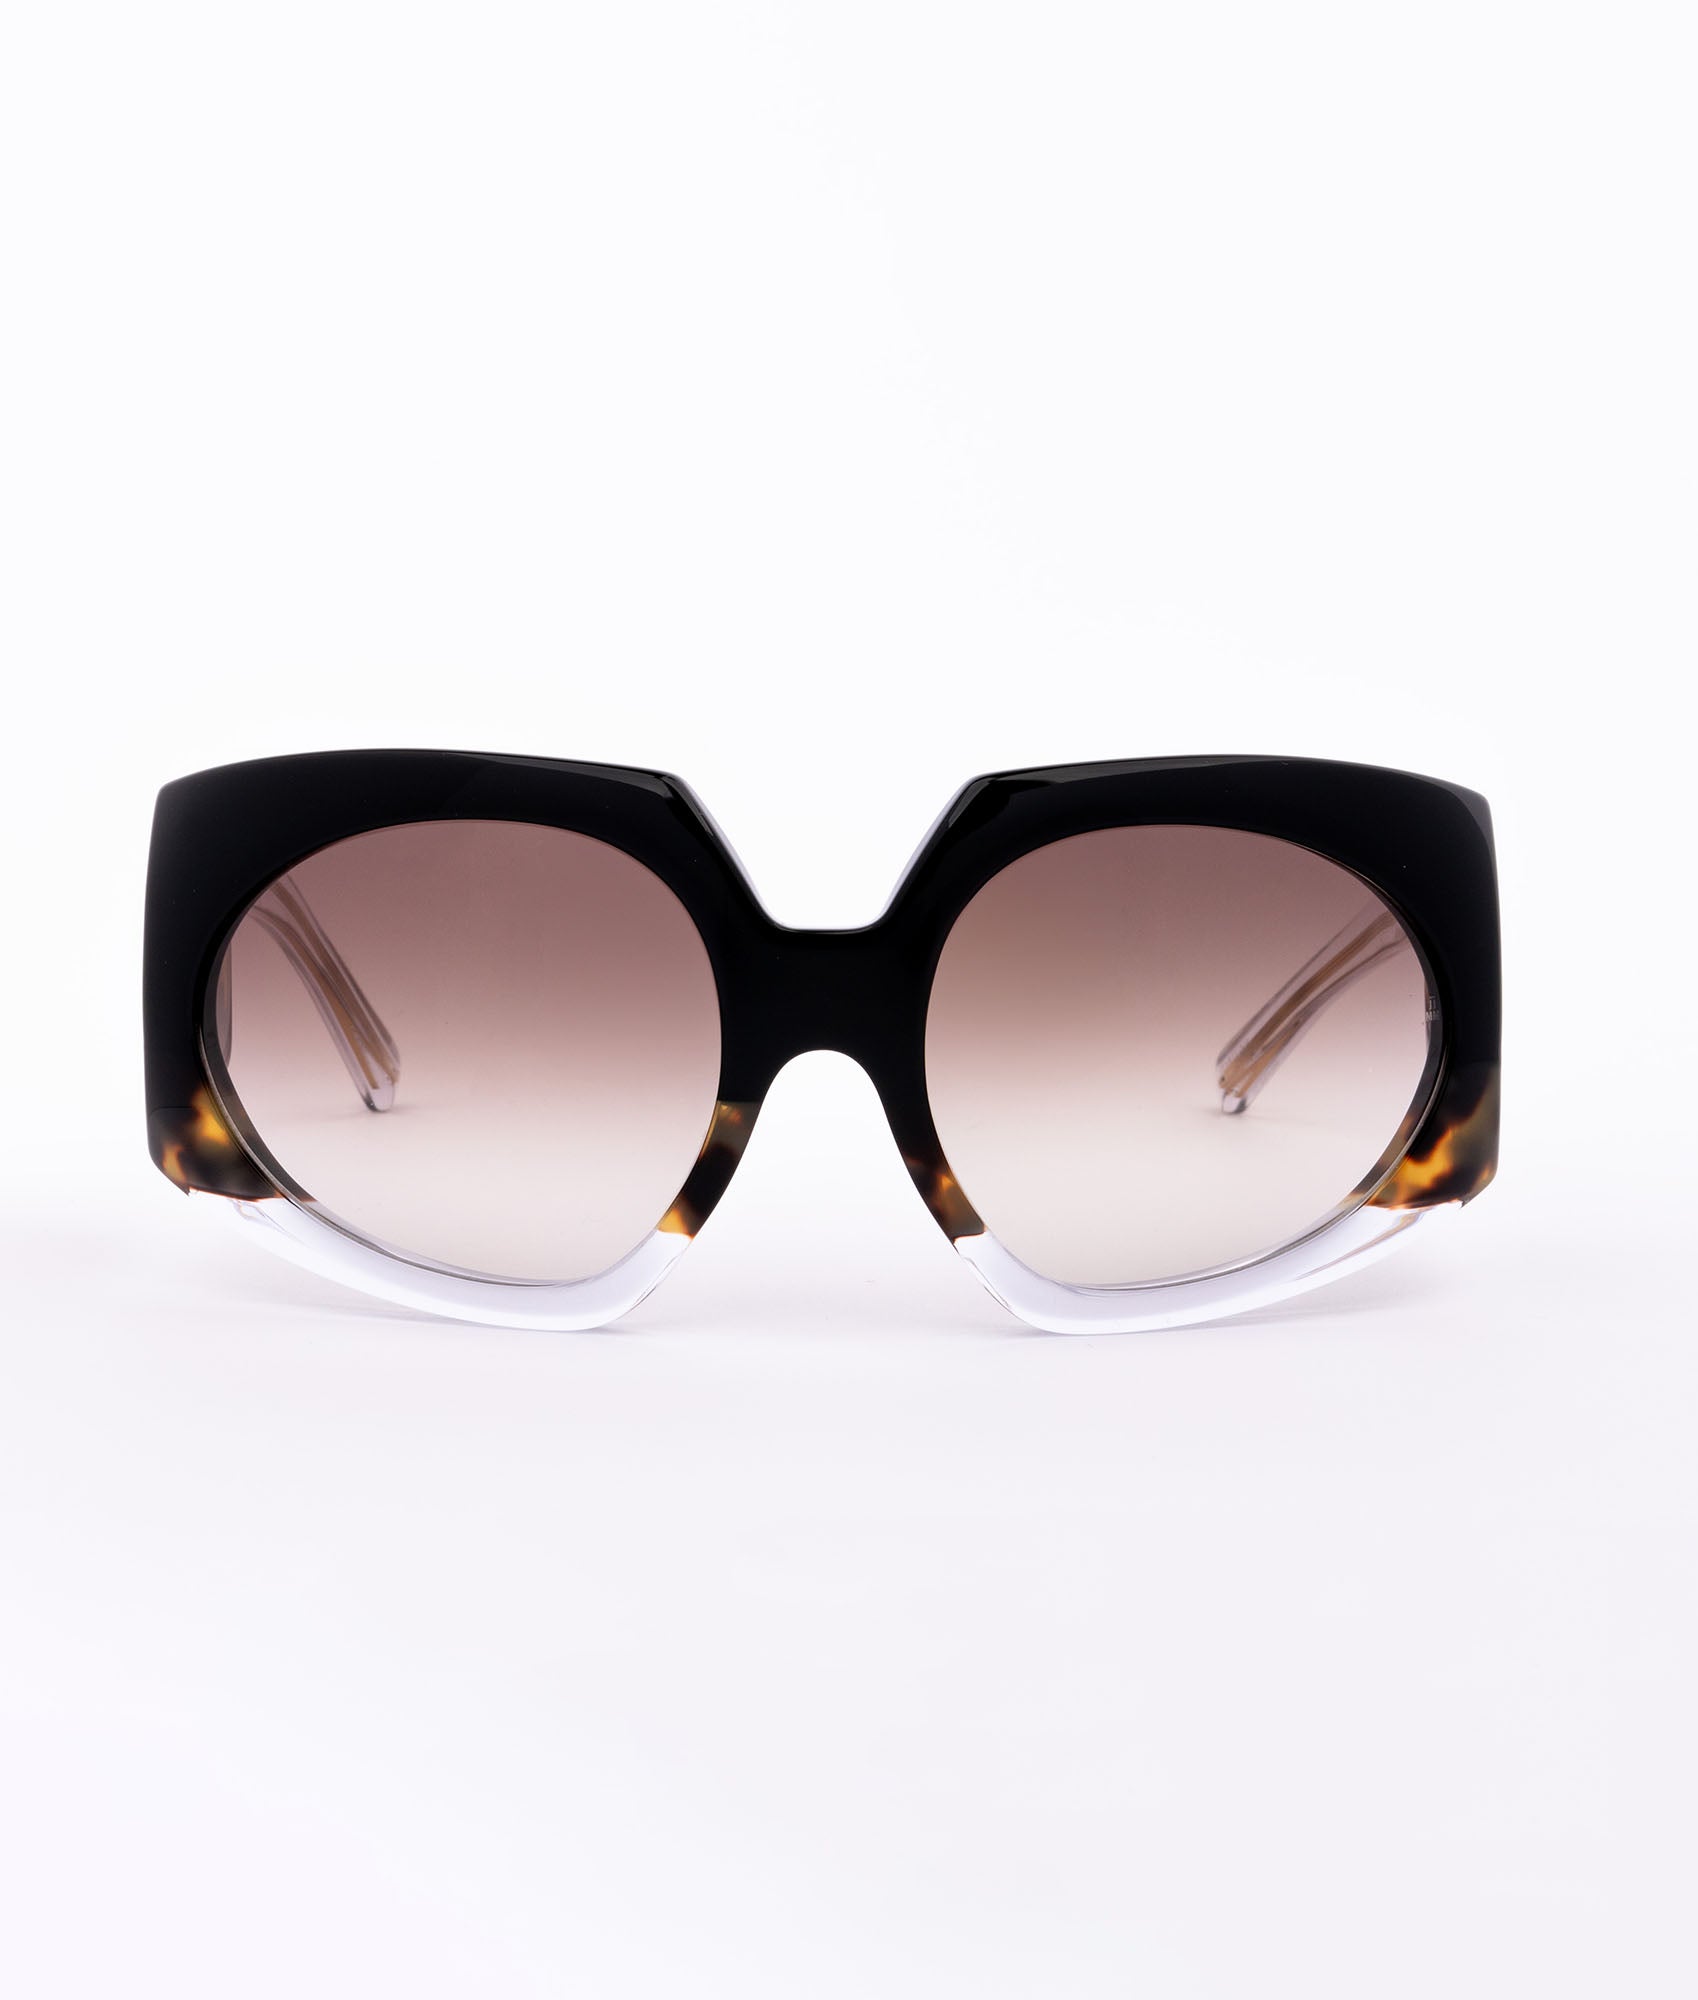 Optical Style 21 in black